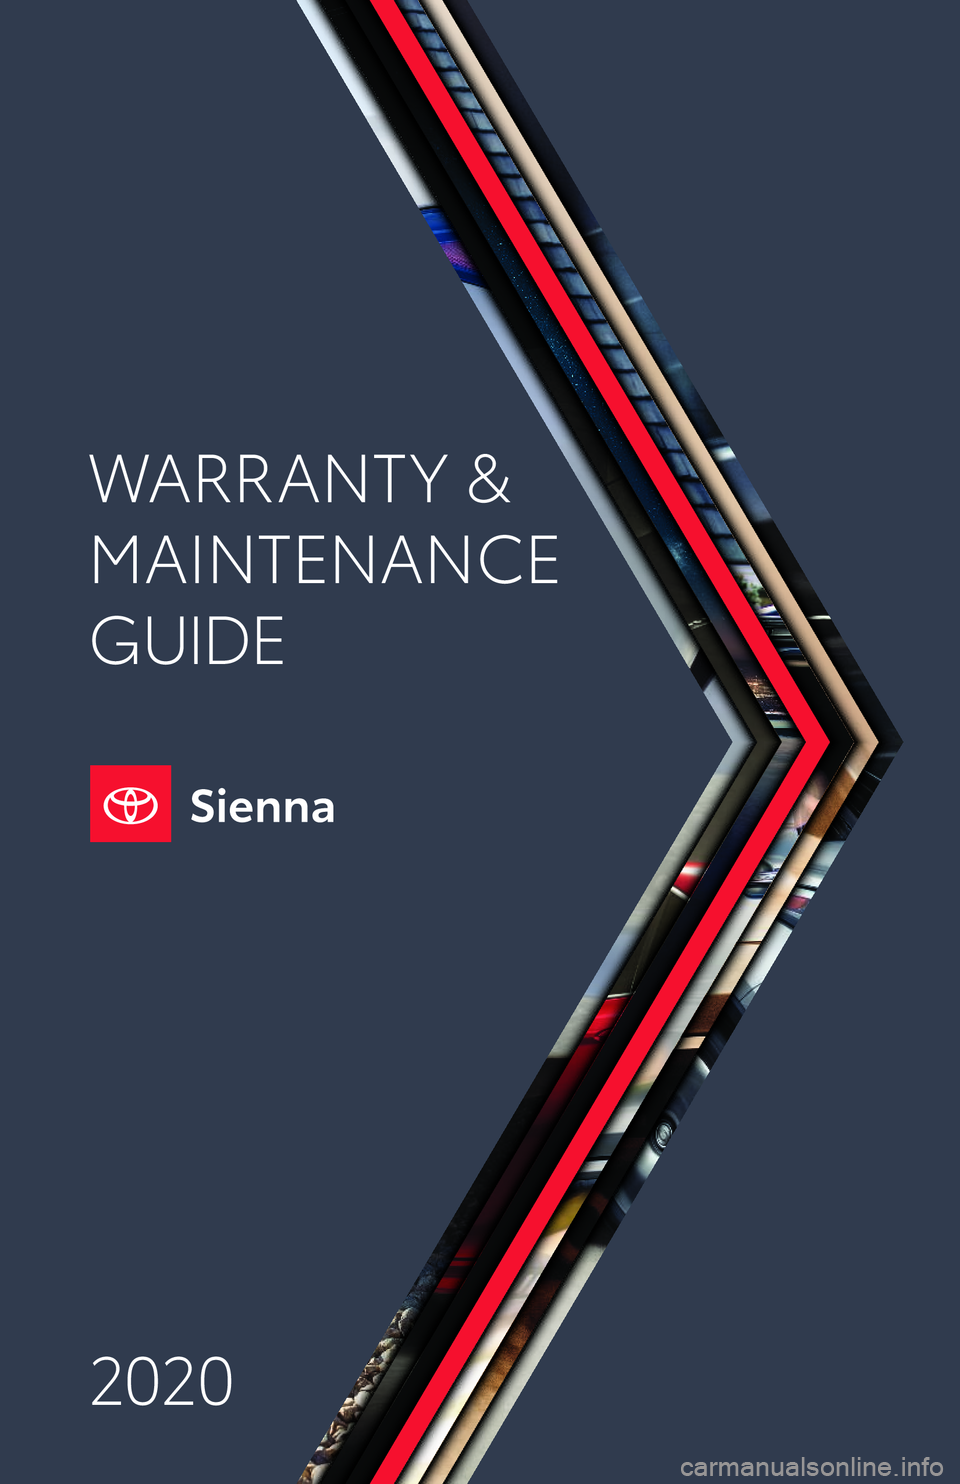 TOYOTA SIENNA 2020  Warranties & Maintenance Guides (in English) 2020
WARRANT Y &
MAINTENANCE 
GUIDE
118666_18-TCS-12629_WMG_MY20Sienna_Cover_1_R1.indd   23/9/19   8:46 AM        